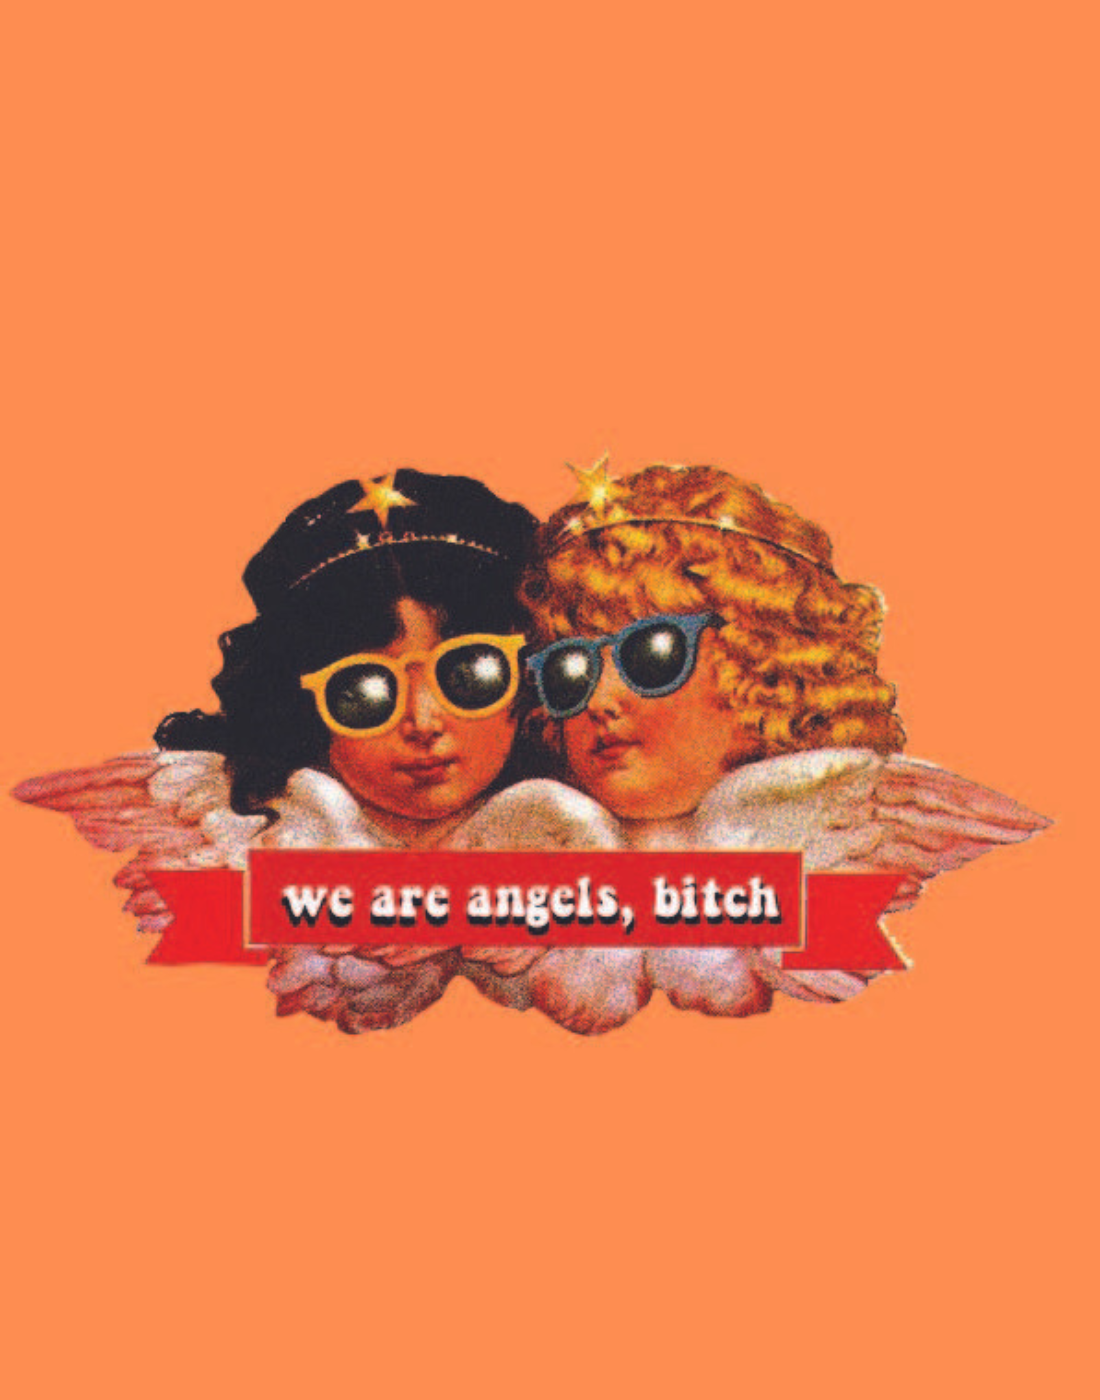 ANGELS BITCH POSTER IN MULTIPLE COLORS - PosterFi